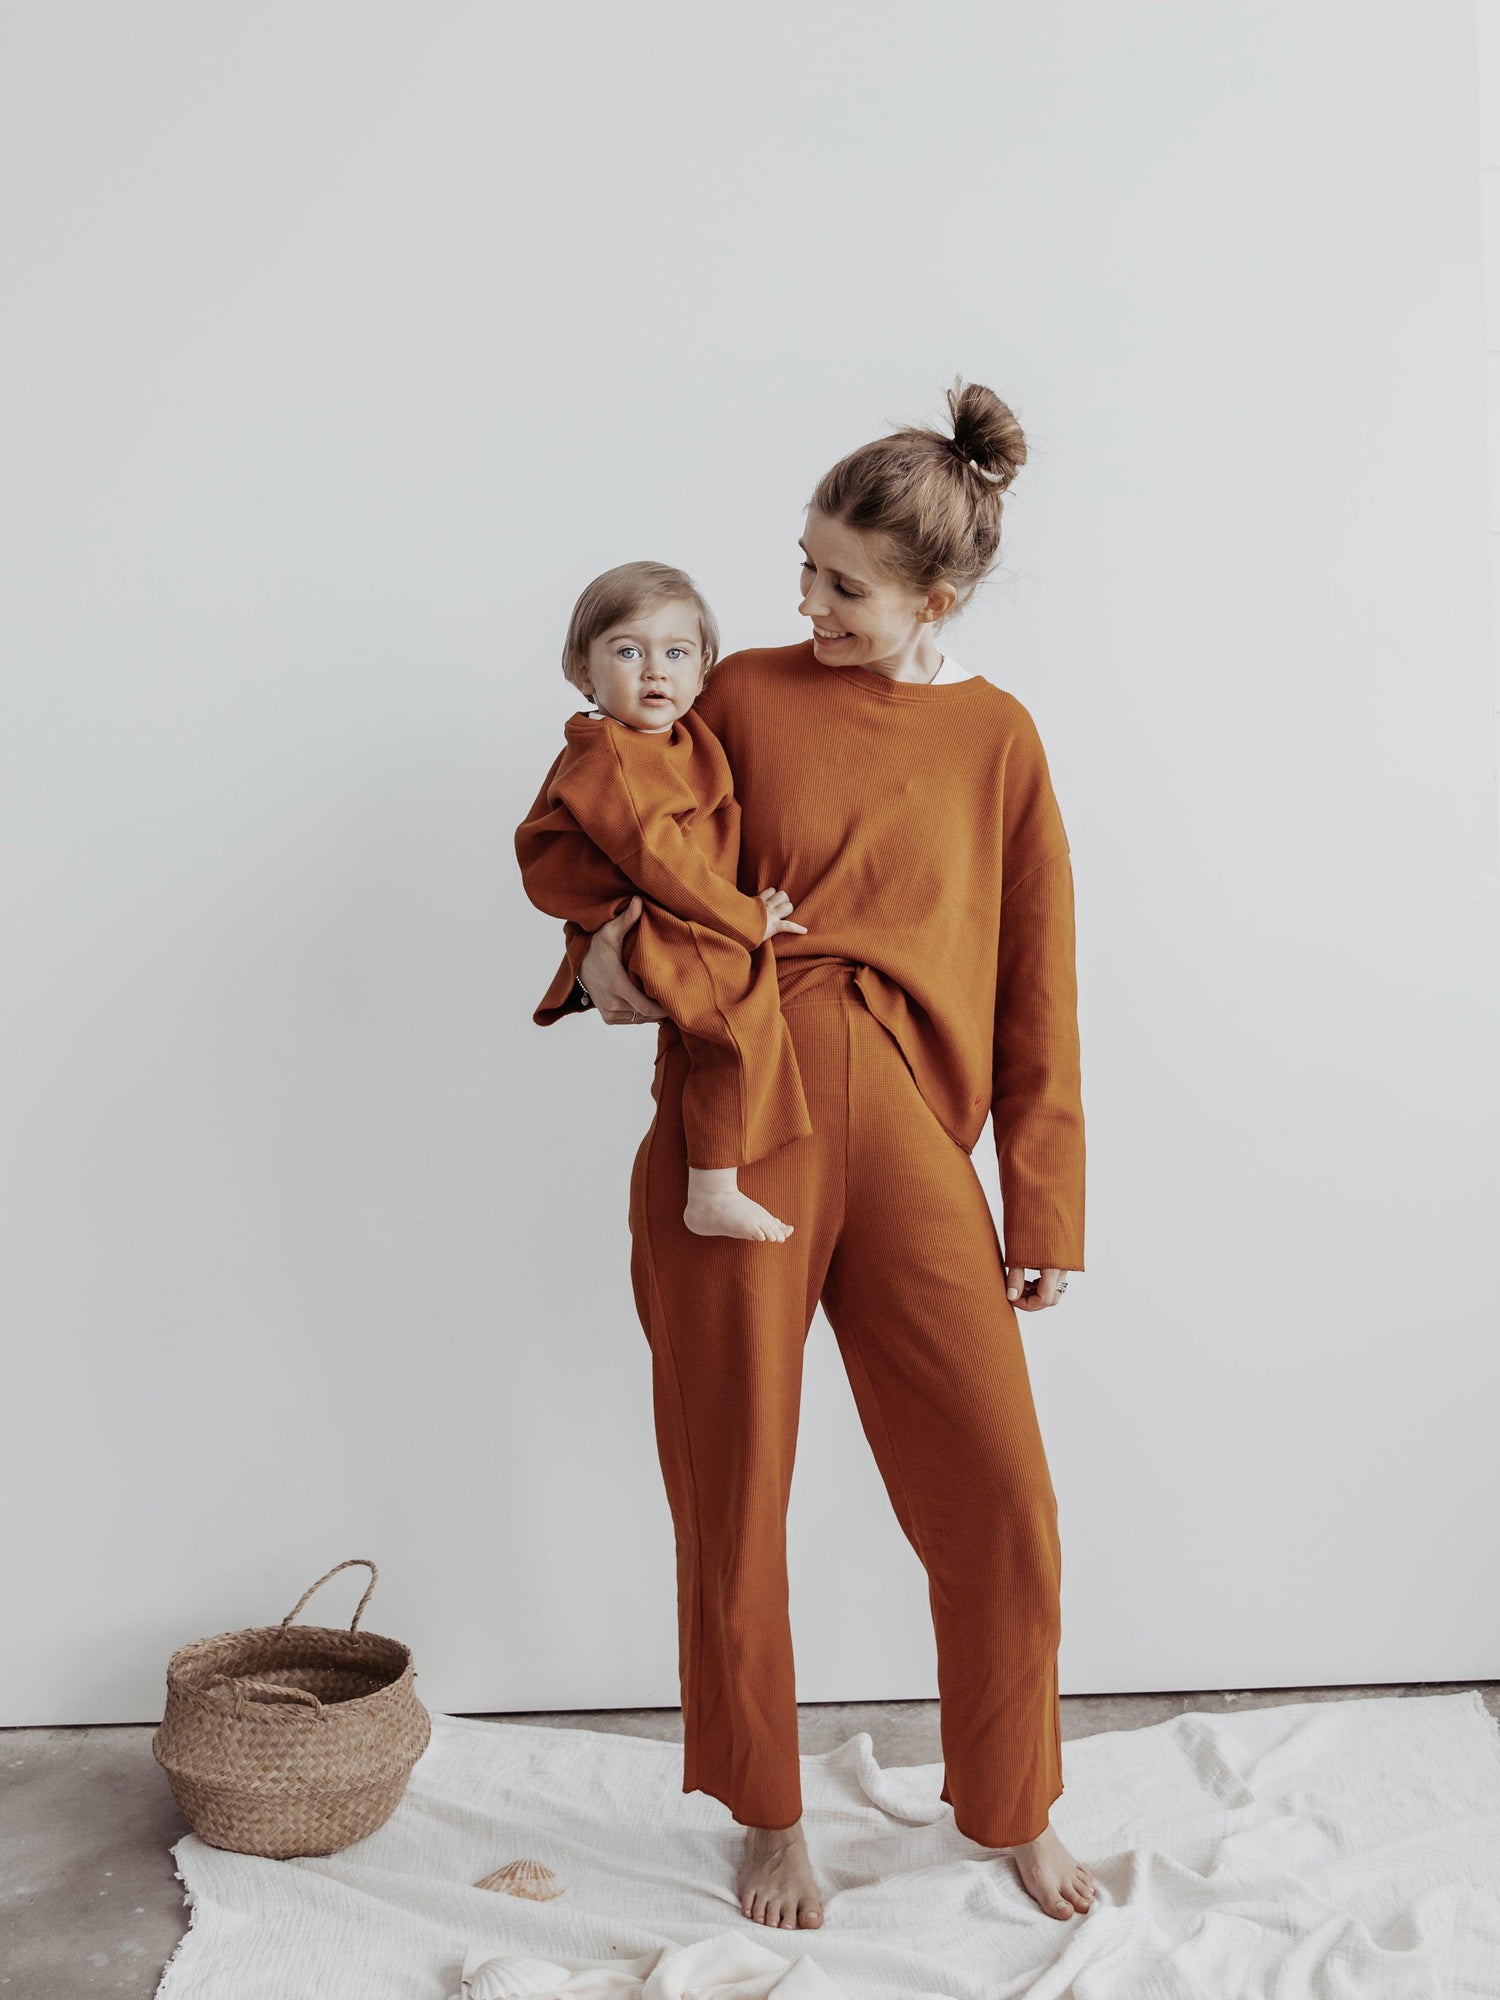 Matching Pants Adults - The Little One • Family.Concept.Store. 